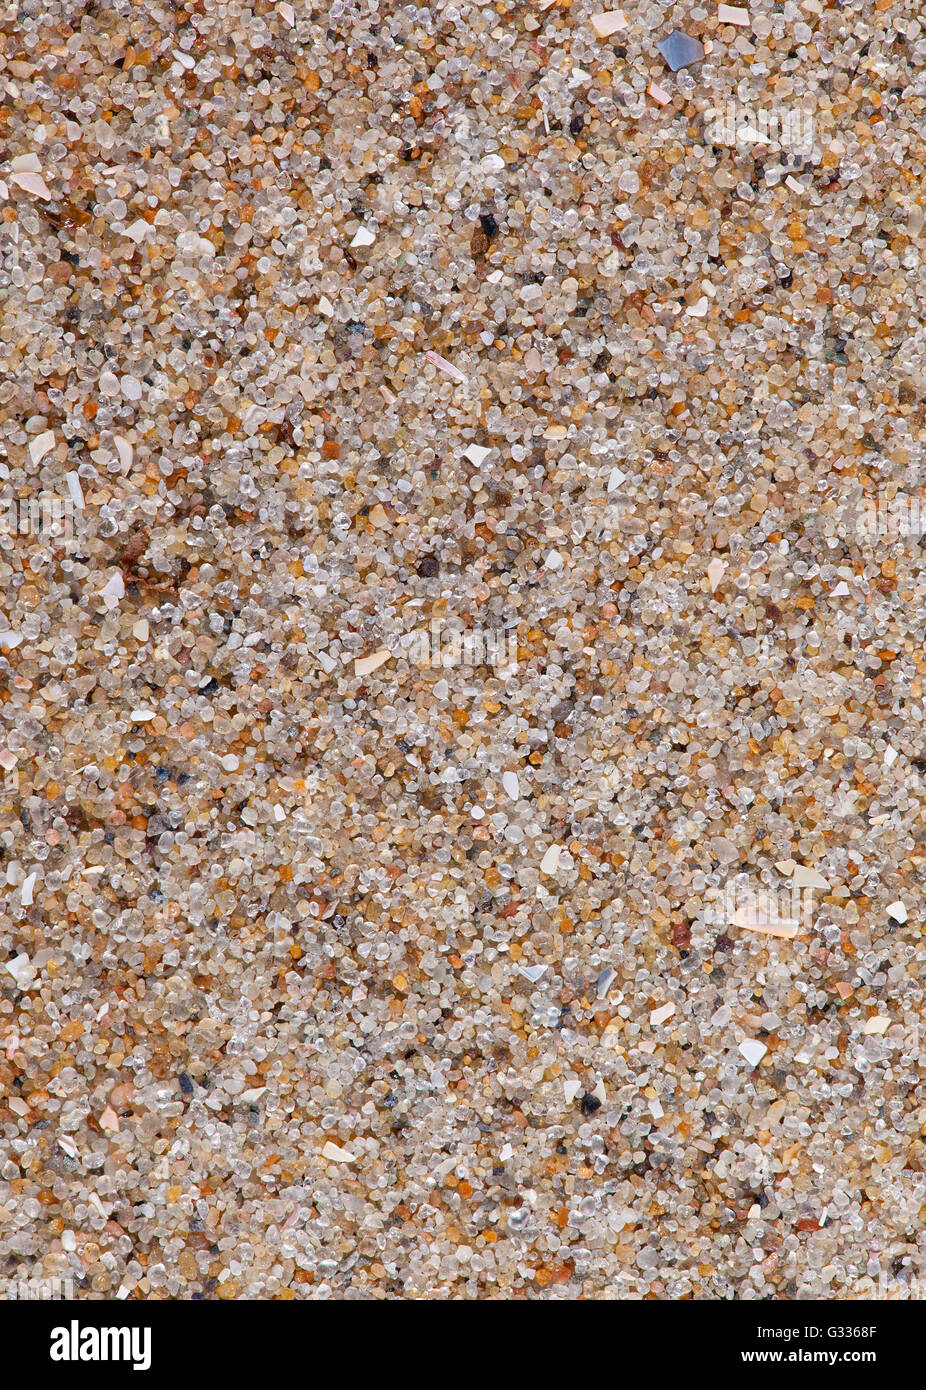 Sand sample from The Hague, Netherlands Stock Photo